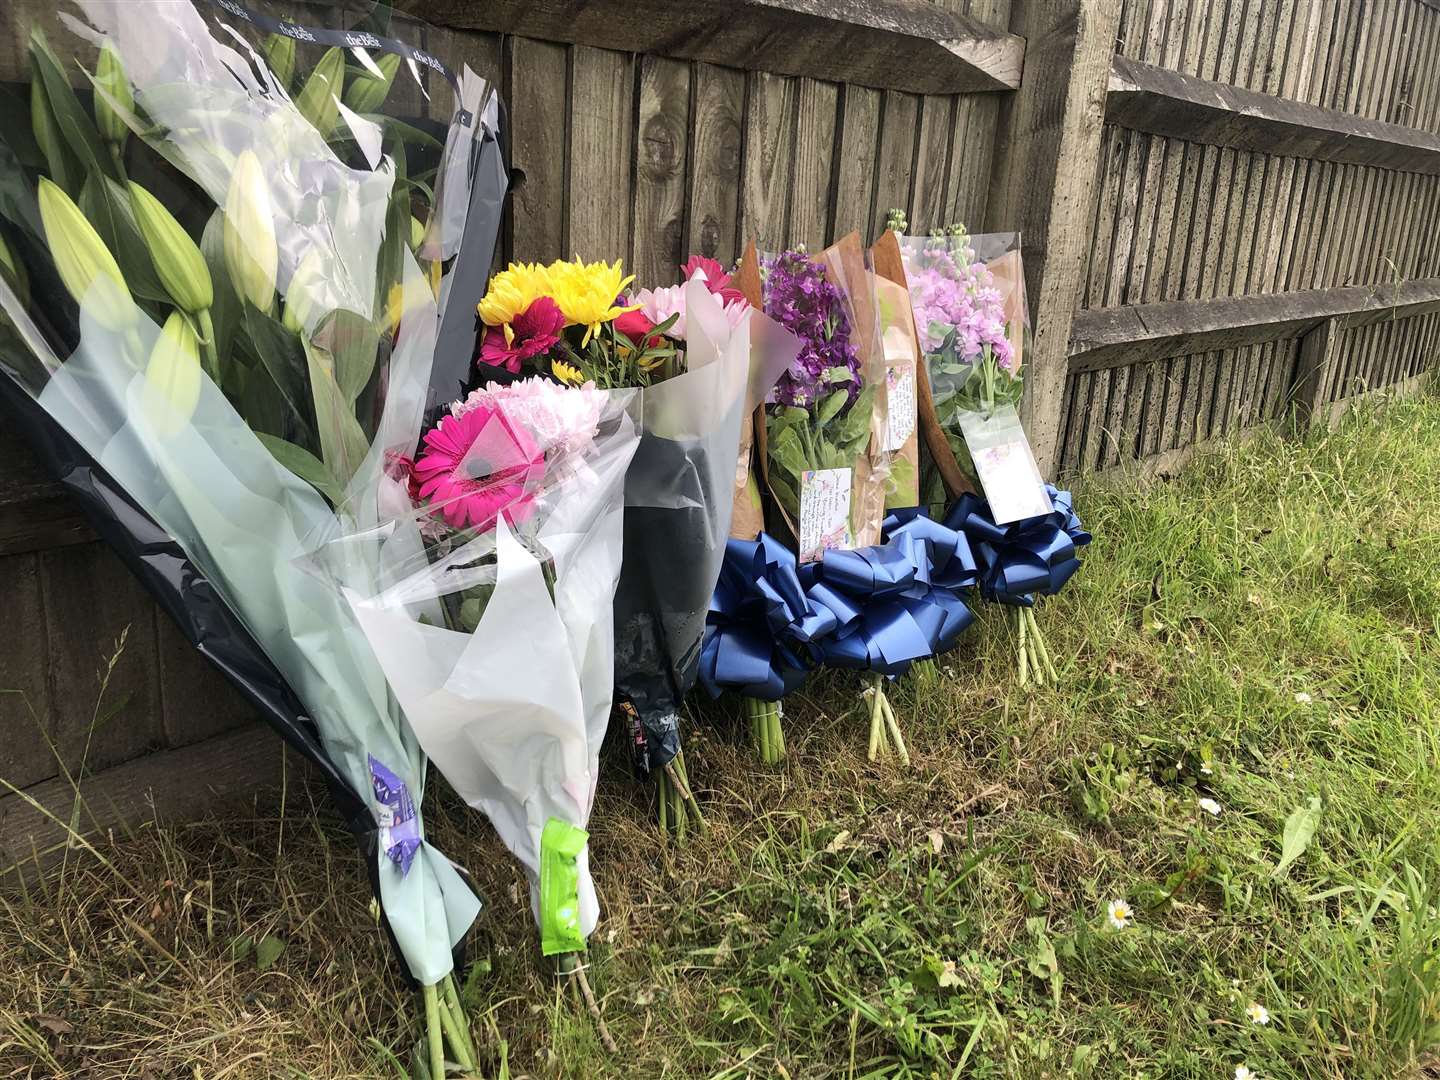 Floral tributes left at the scene of the fatal crash